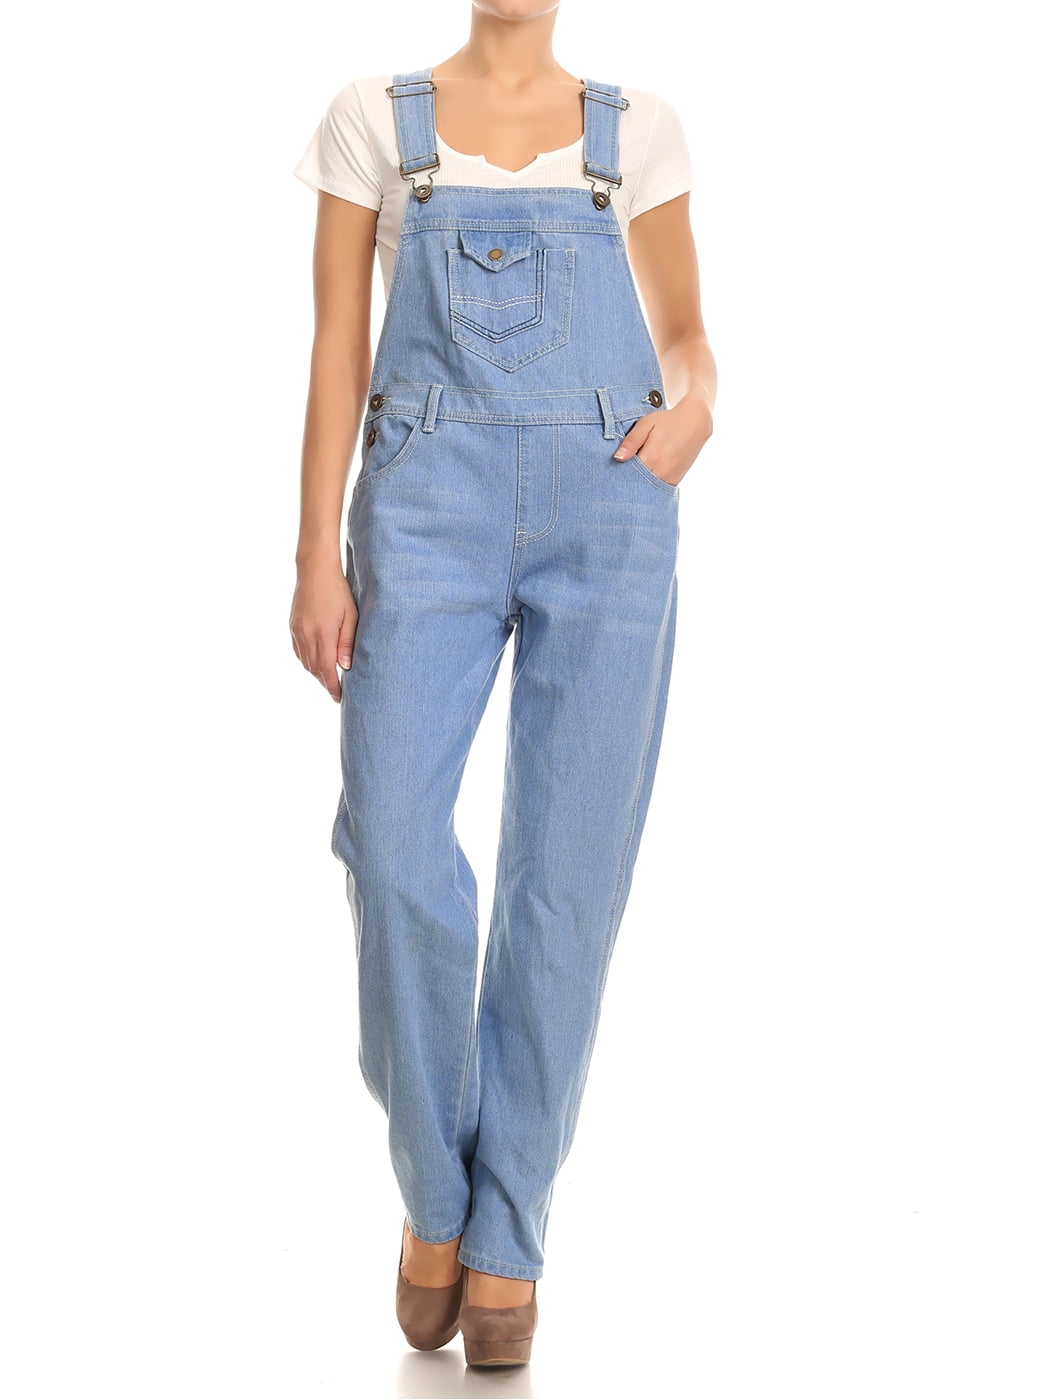 Ladies Womens Celeb Jeans Denim Full Length Overall Pinafore Dungaree Jumpsuit 